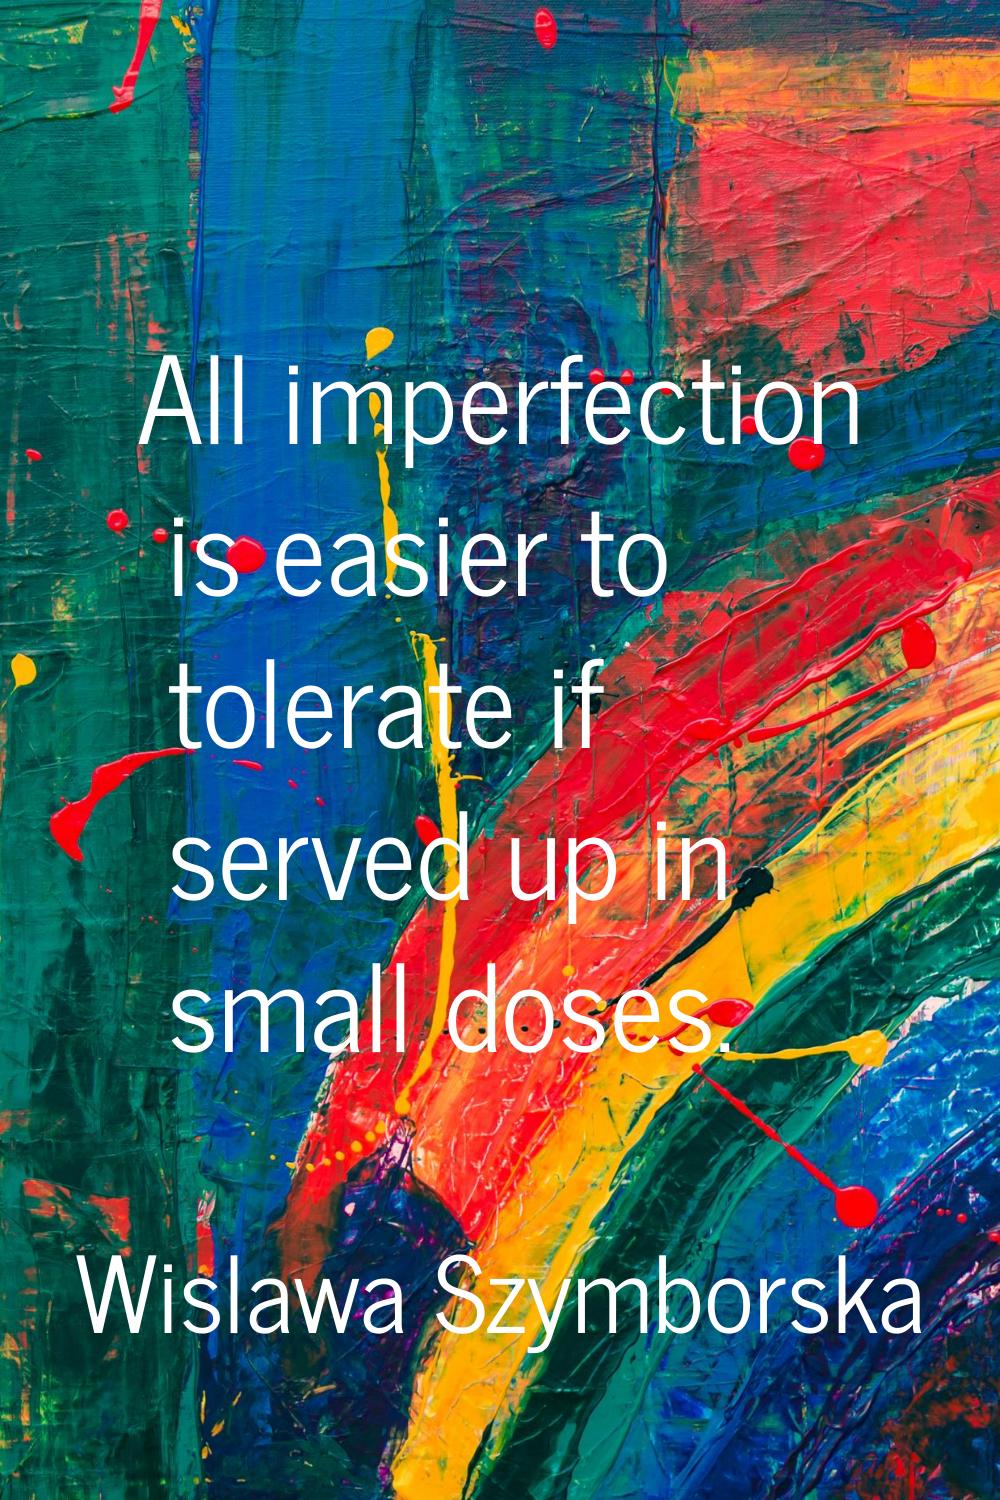 All imperfection is easier to tolerate if served up in small doses.